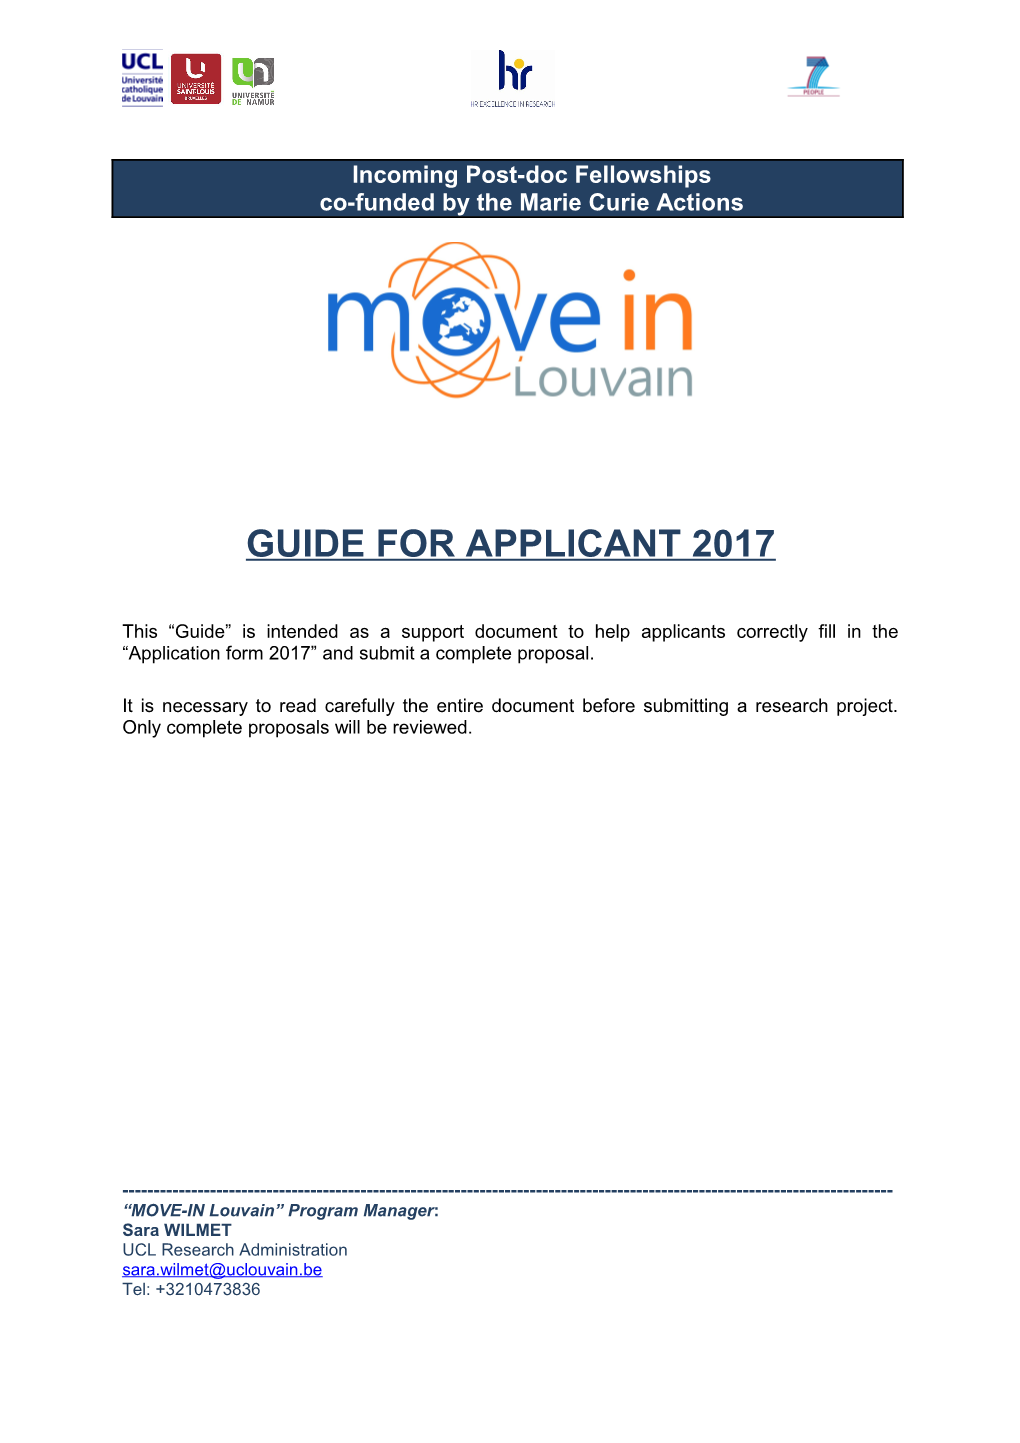 Guide for Applicant 2017